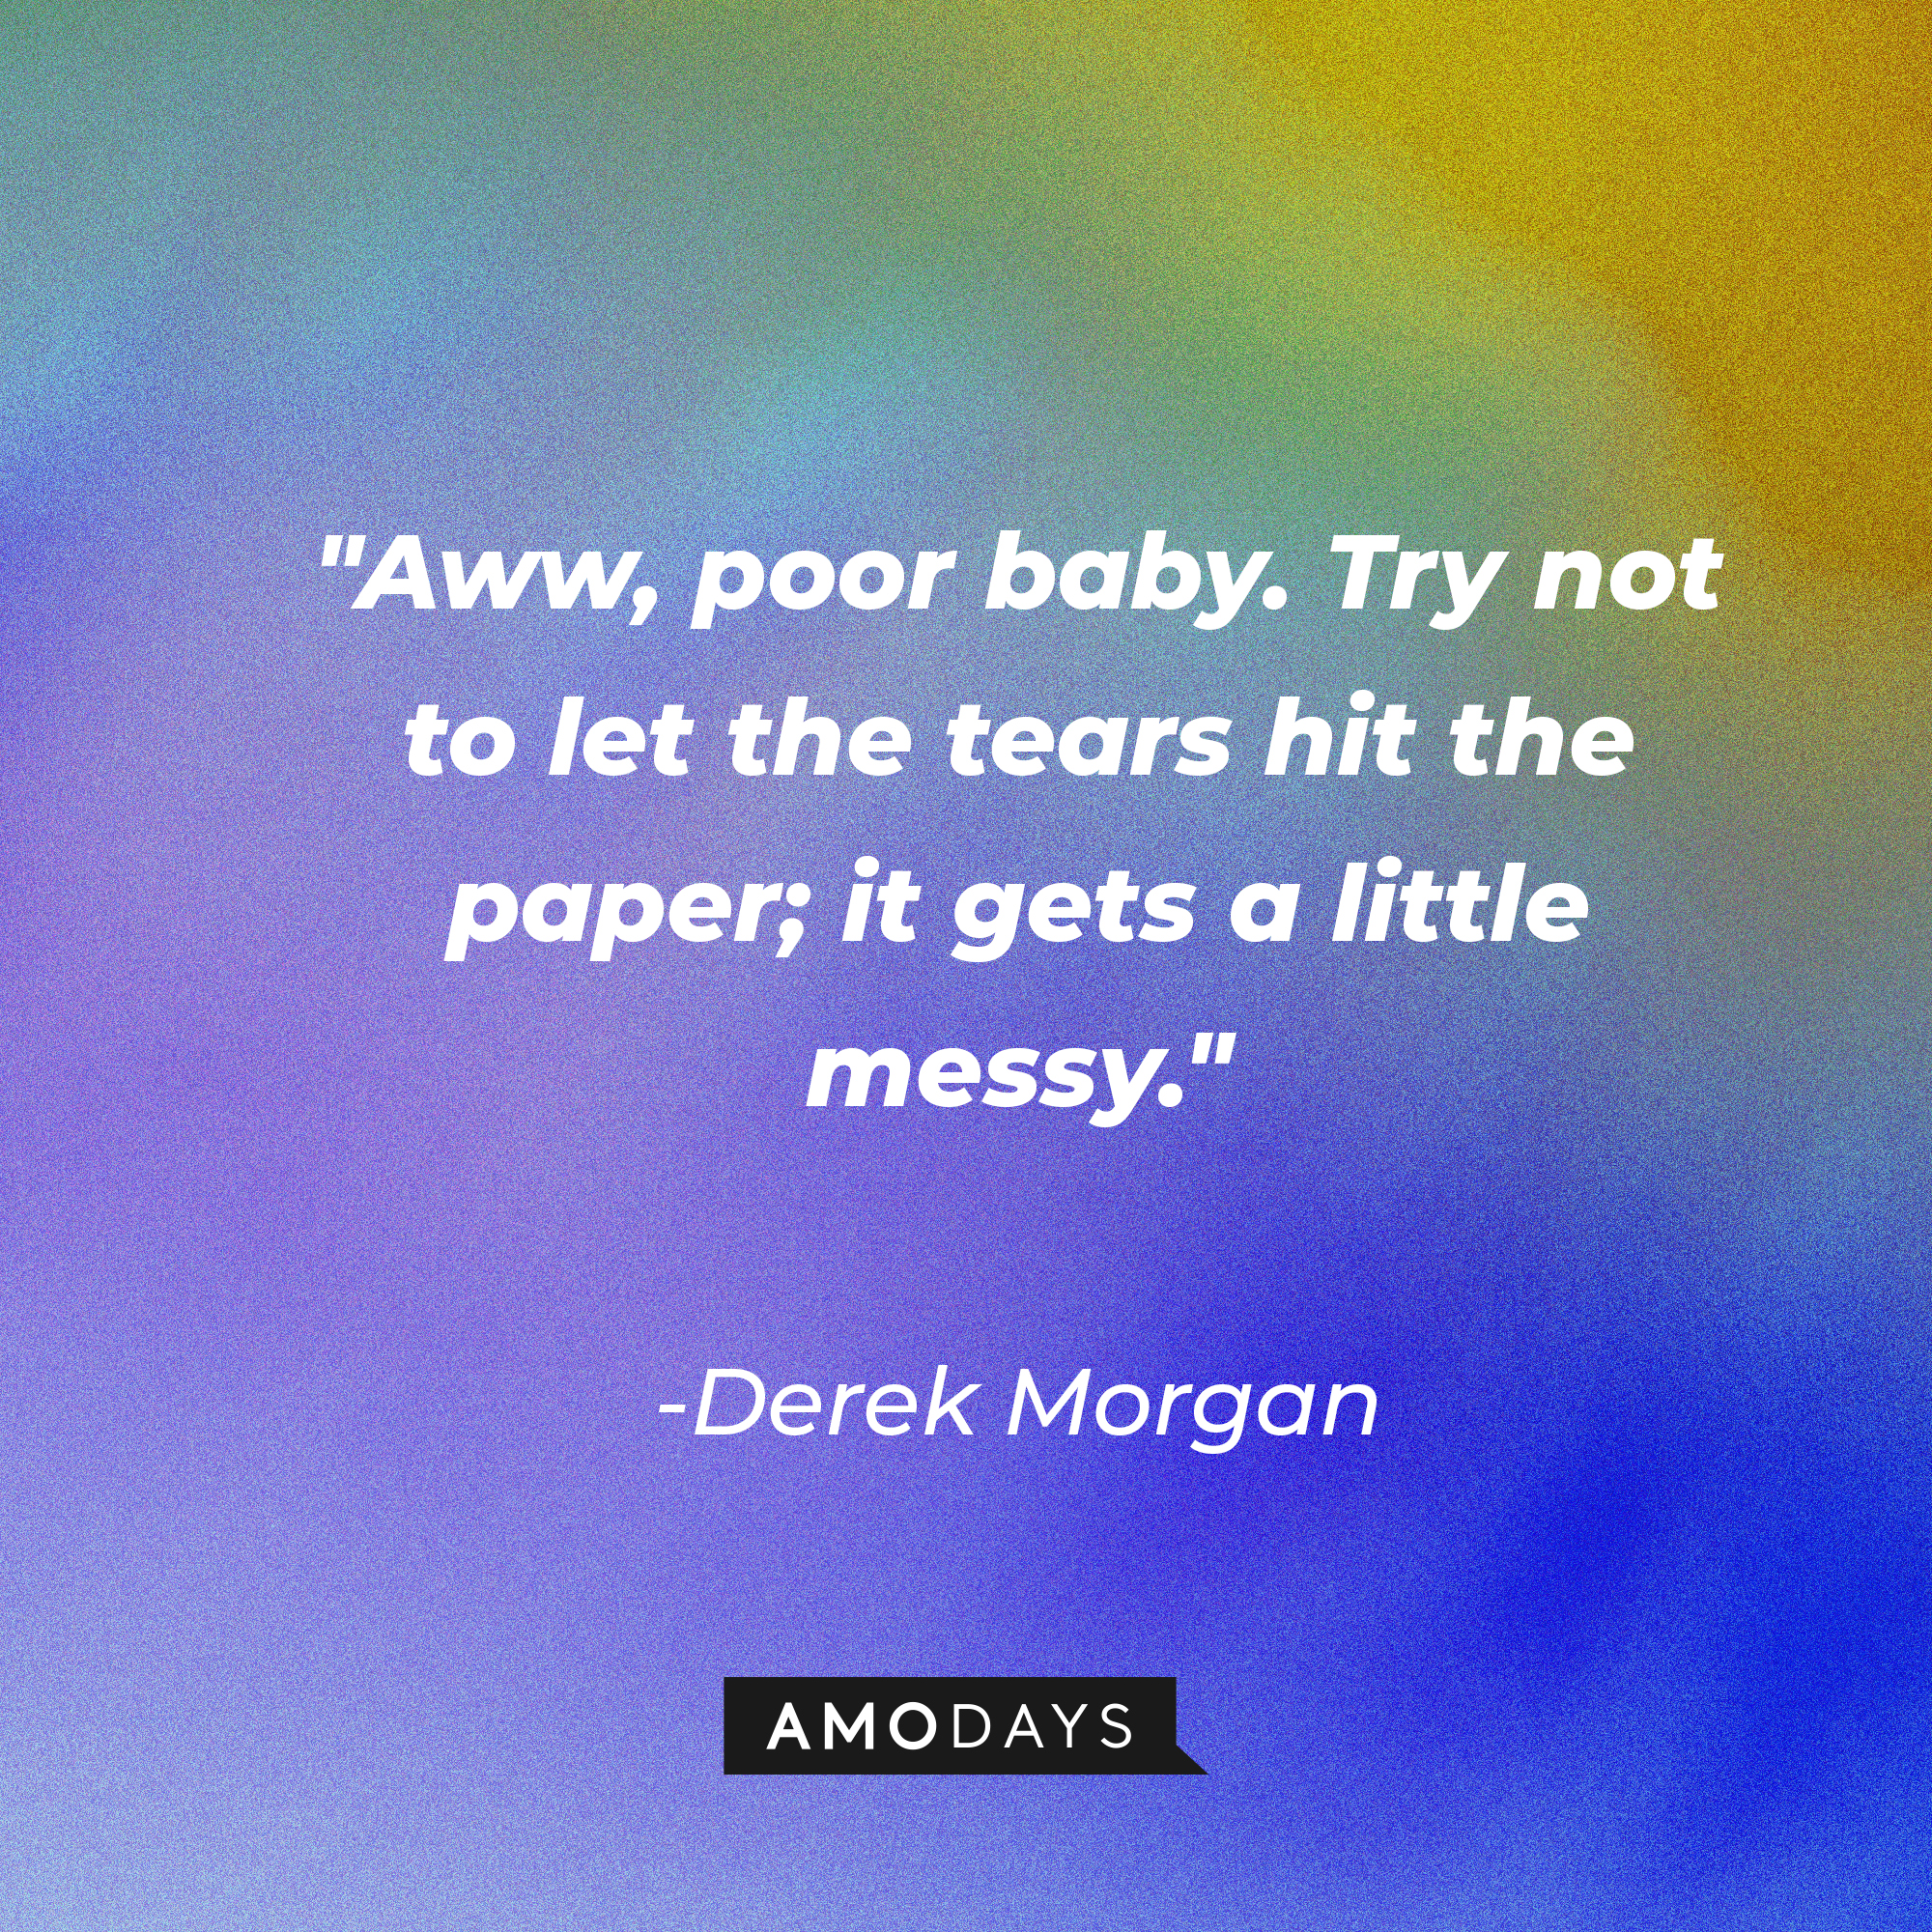 Derek Morgan's quote: "Aww, poor baby. Try not to let the tears hit the paper; it gets a little messy." | Source: AmoDays